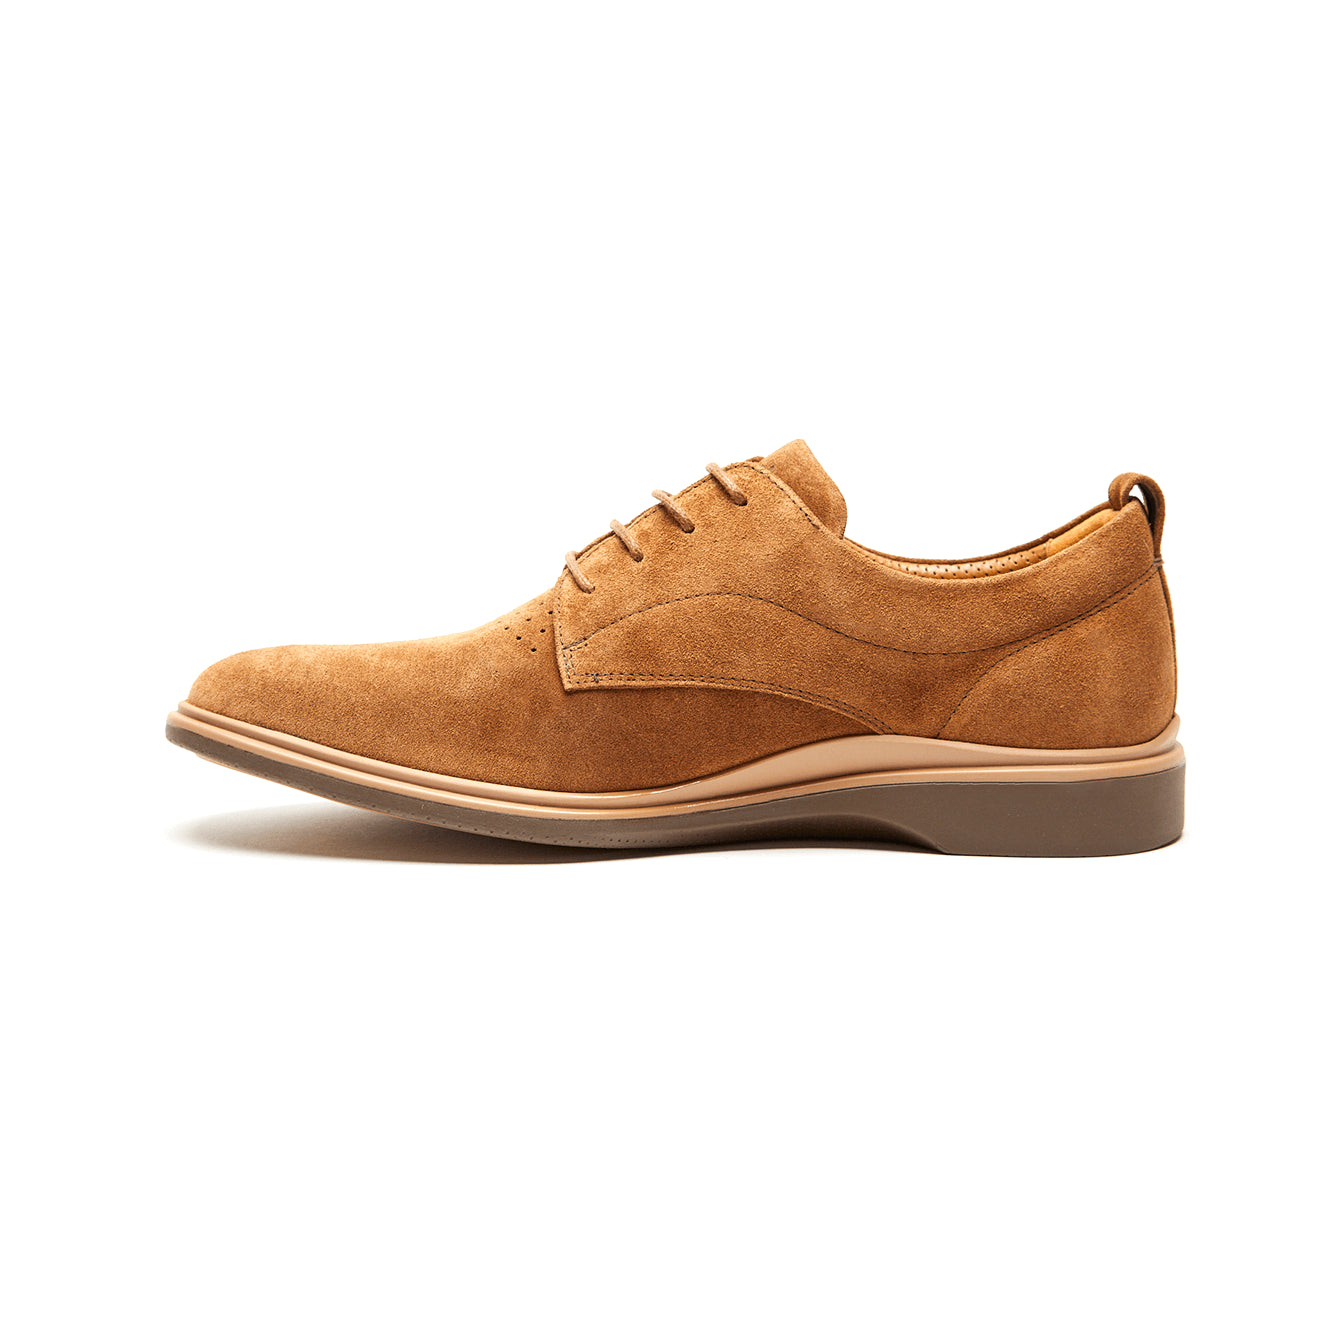 The Original Grizzly Suede shoes from Amberjack